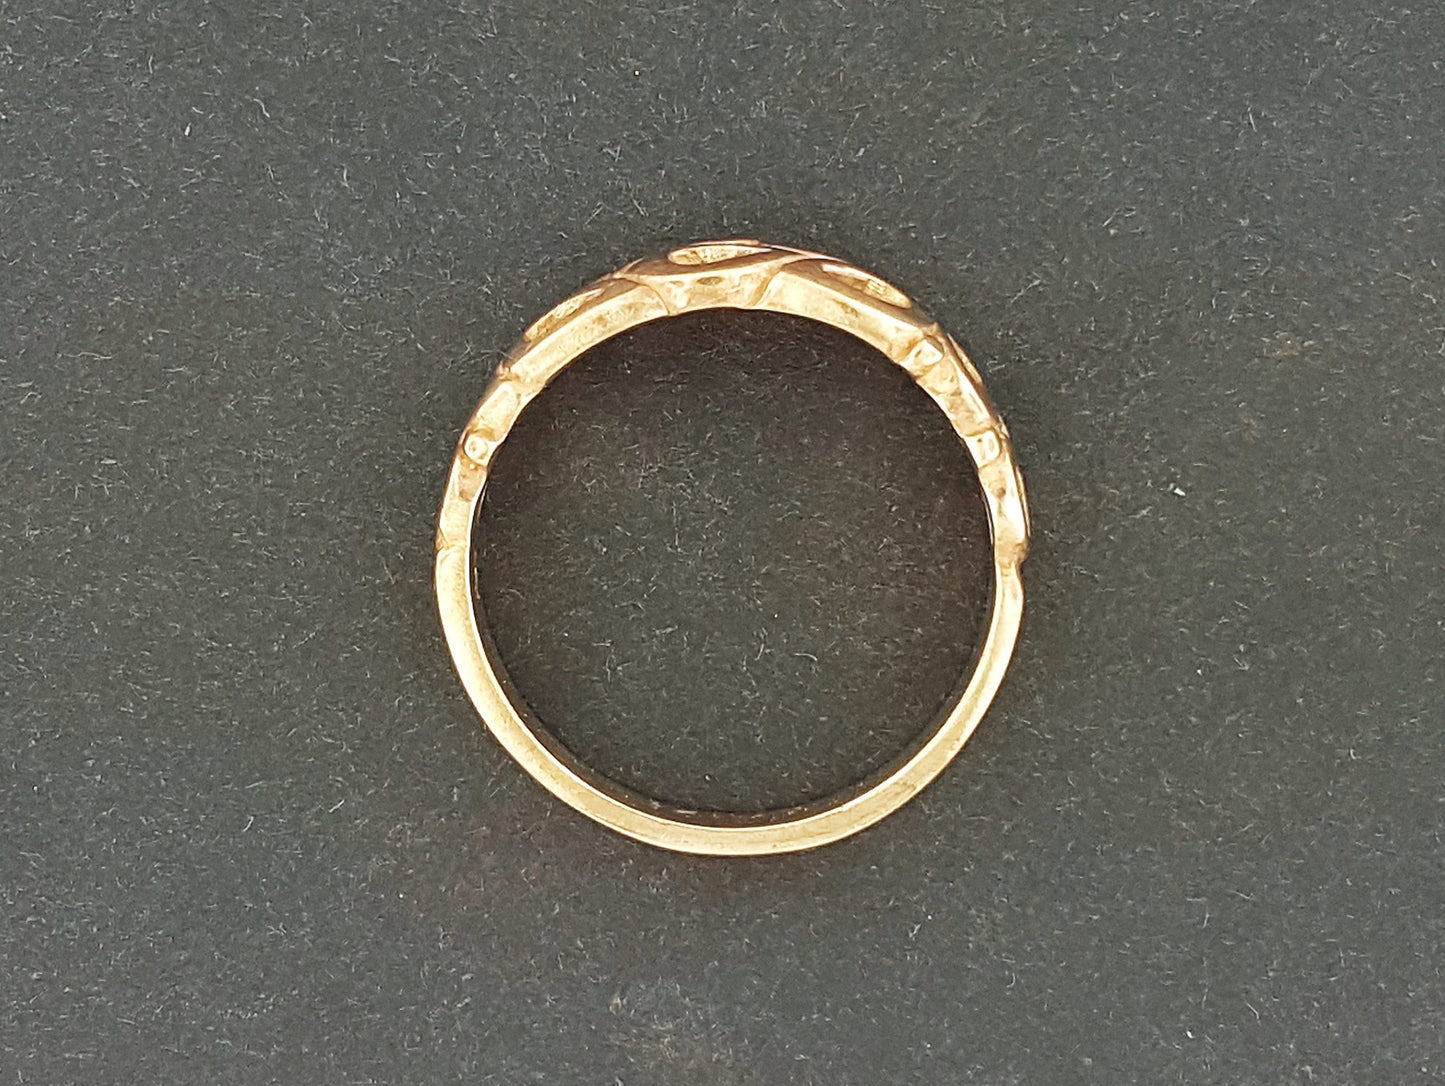 1950s Style Wedding Band in Sterling Silver or Antique Bronze